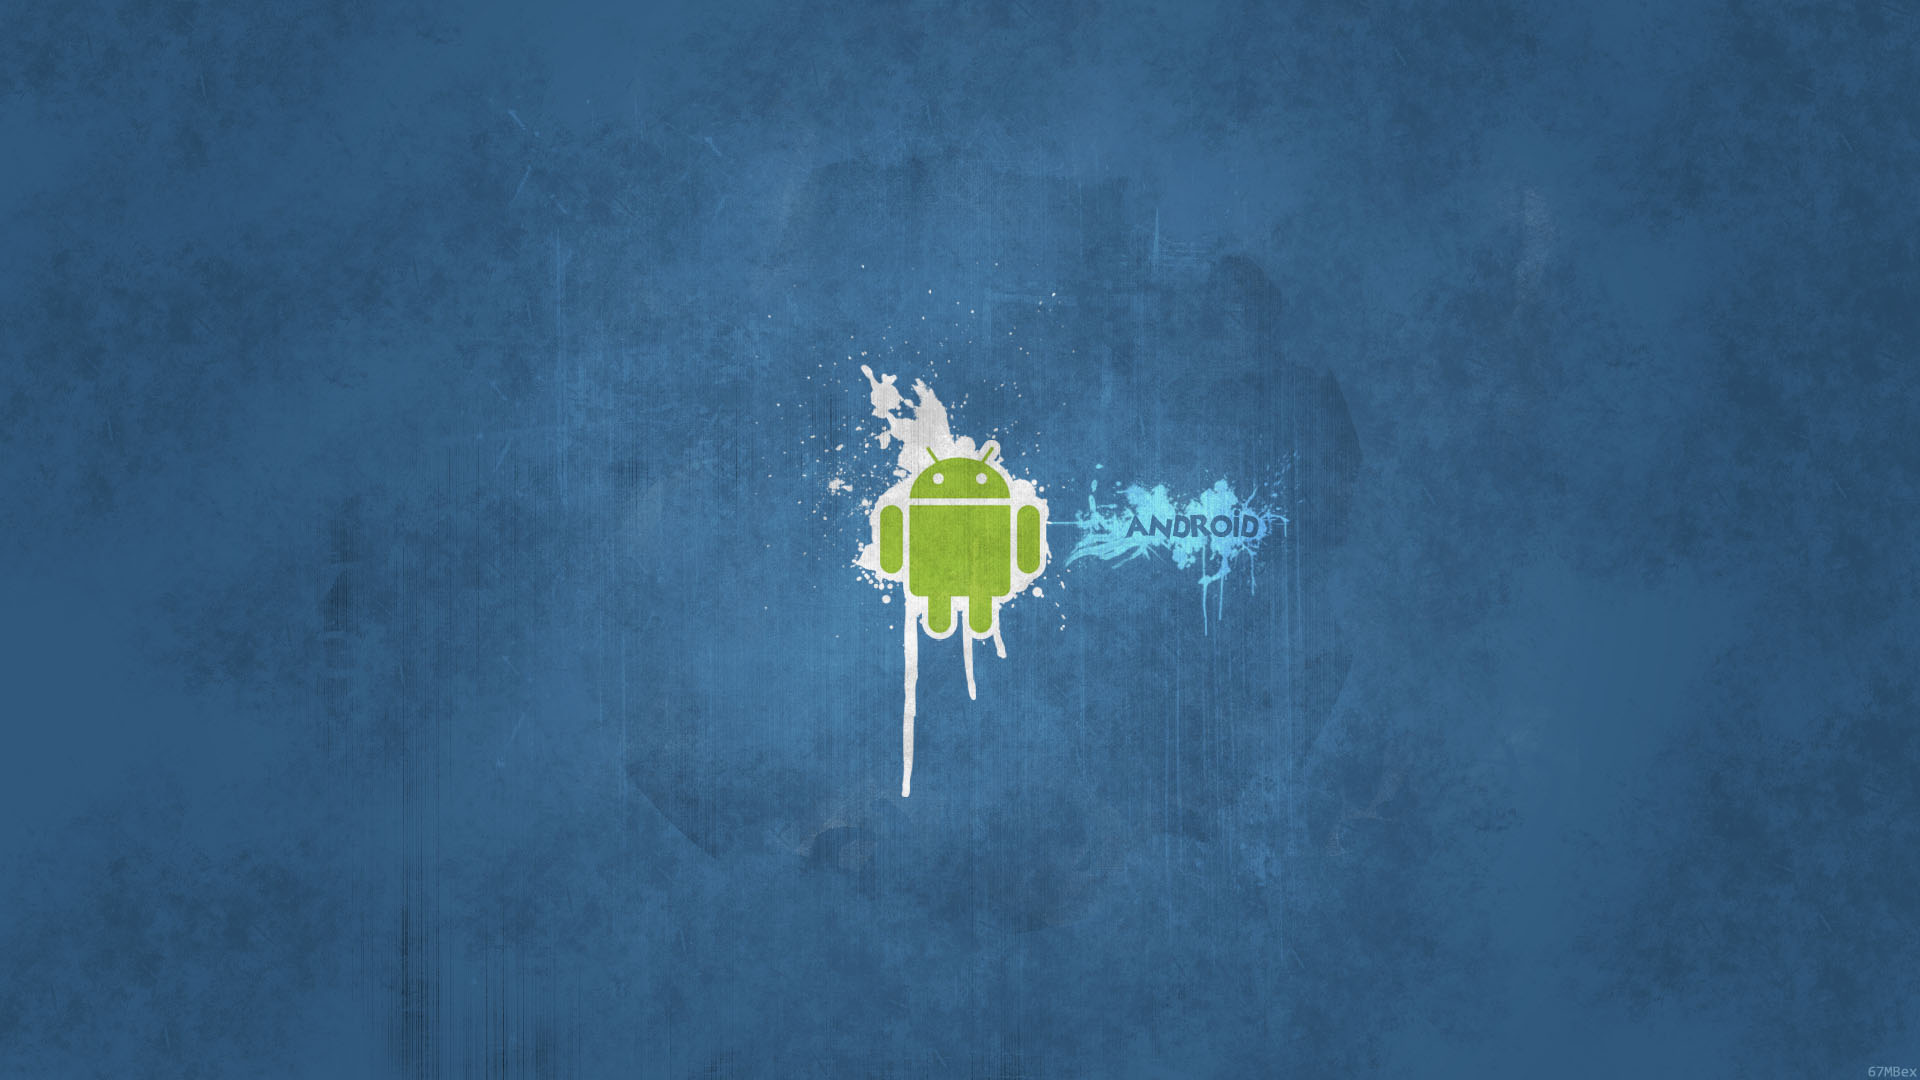 Free download Android Mobile Logo 1920x1080 HD Image Computers